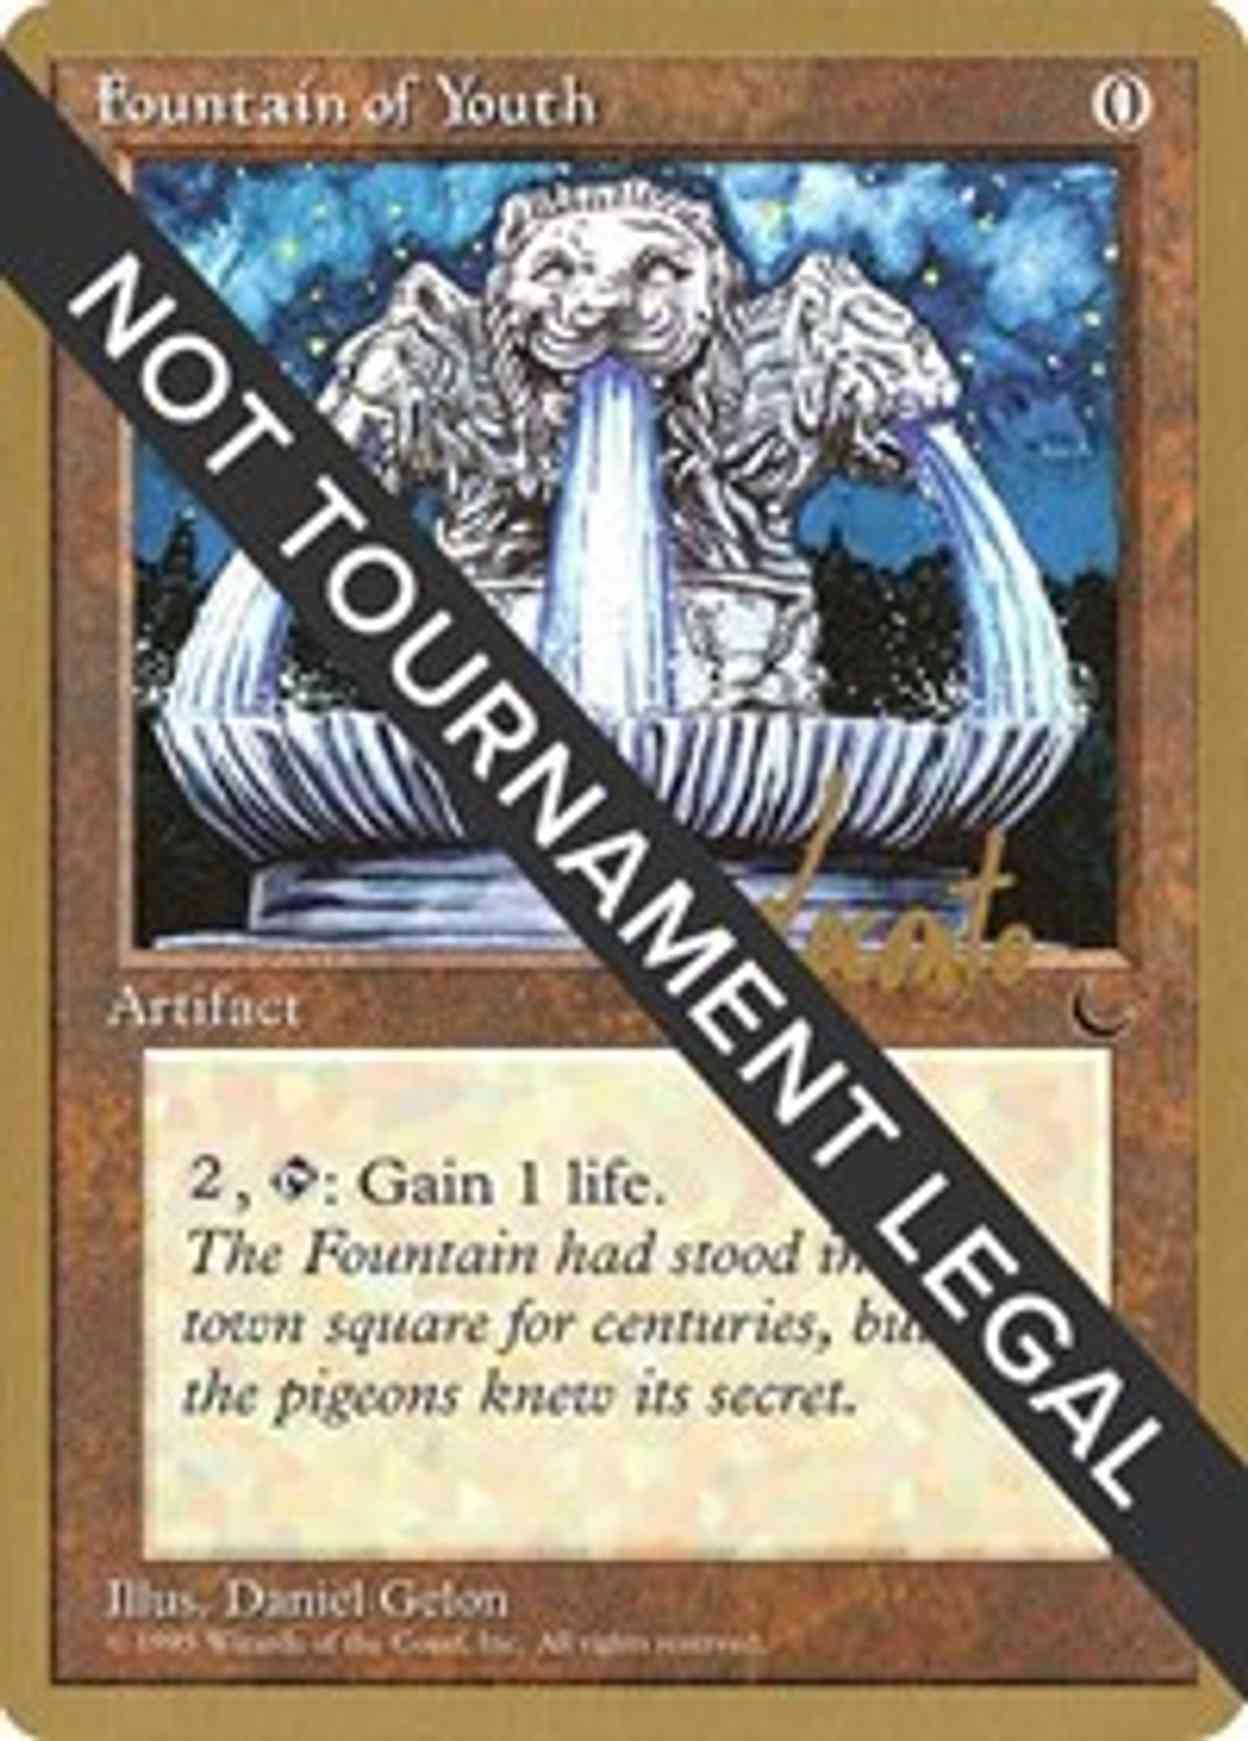 Fountain of Youth - 1996 Michael Loconto (DRK) magic card front